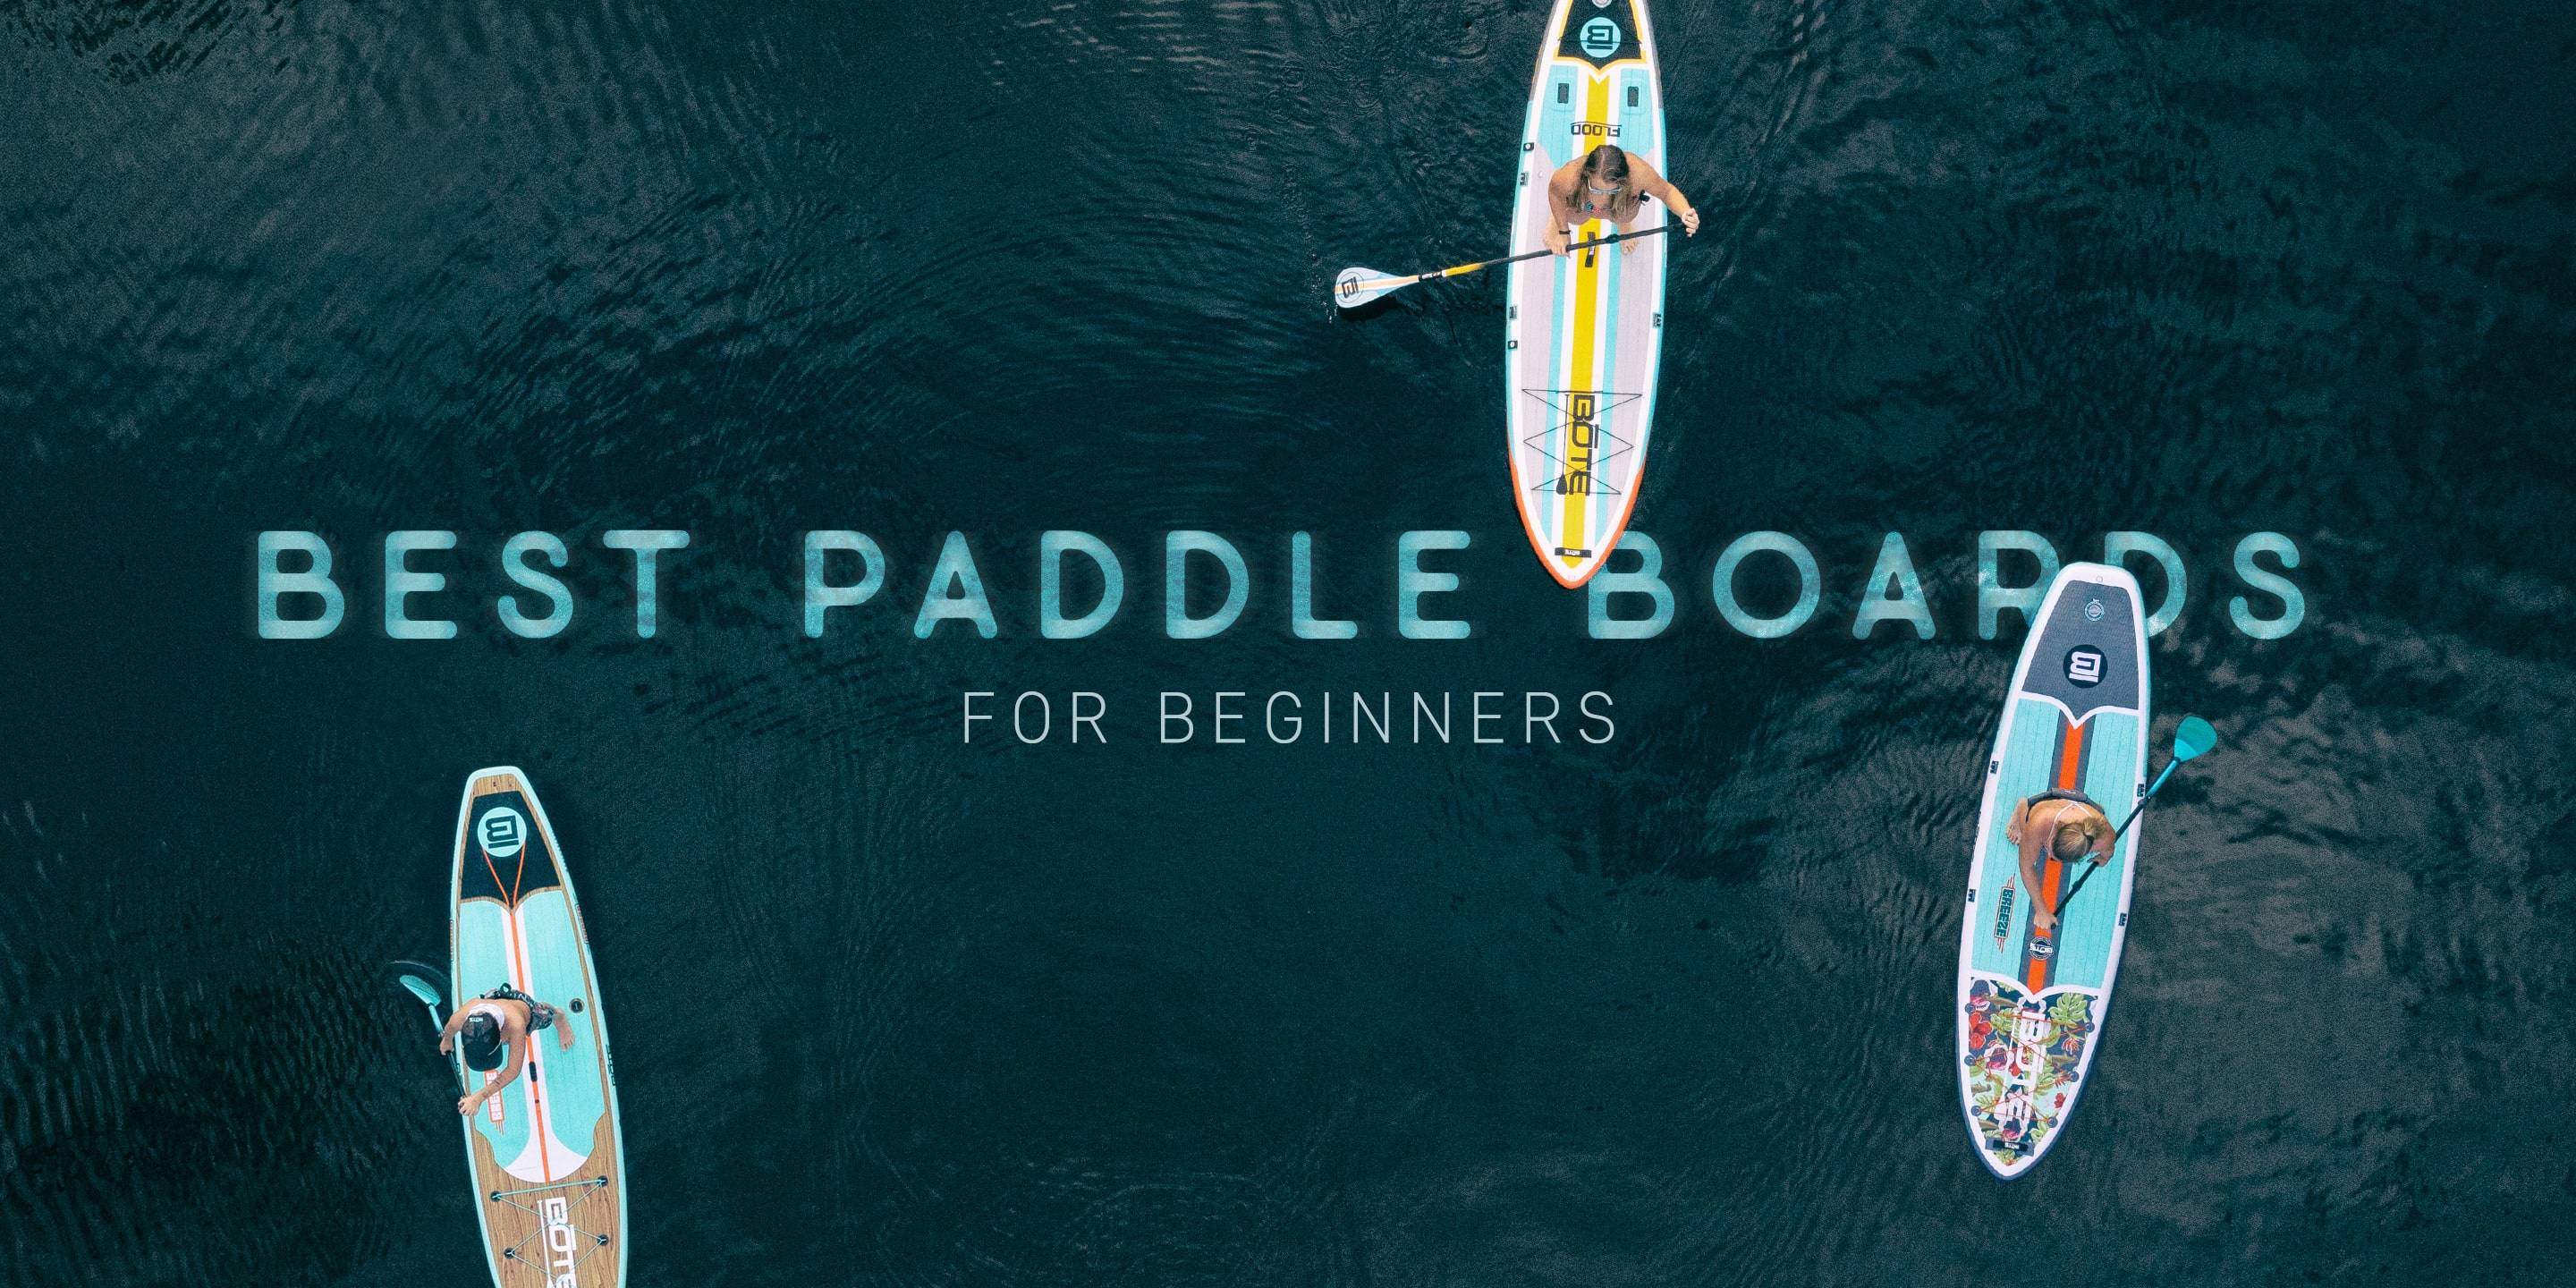 Three of the best paddle boards for beginners